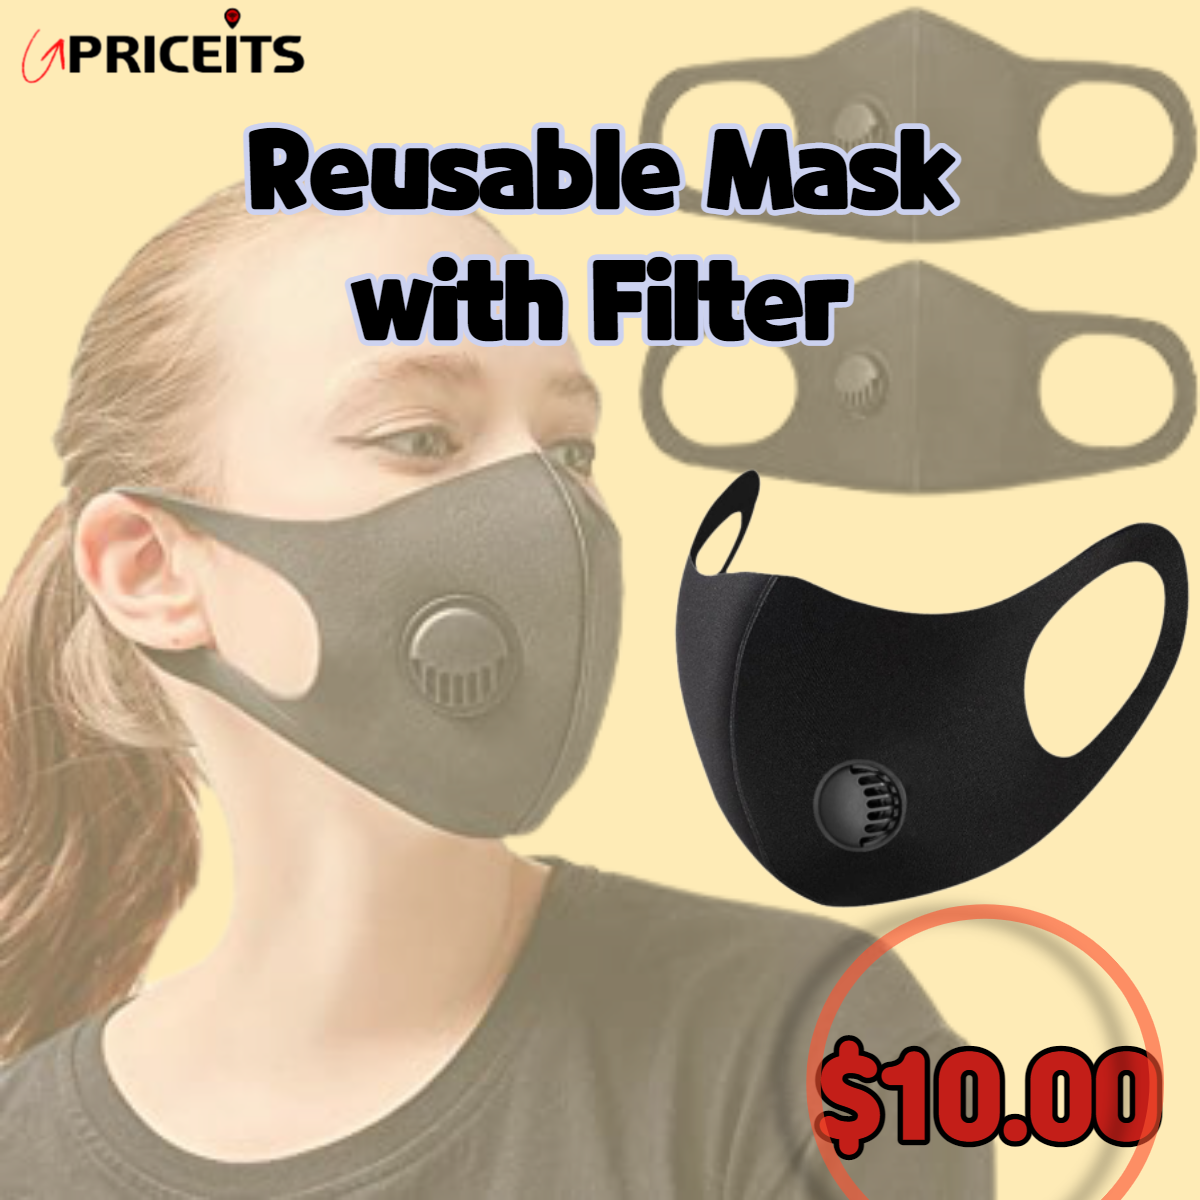 Reusable mask with valve black